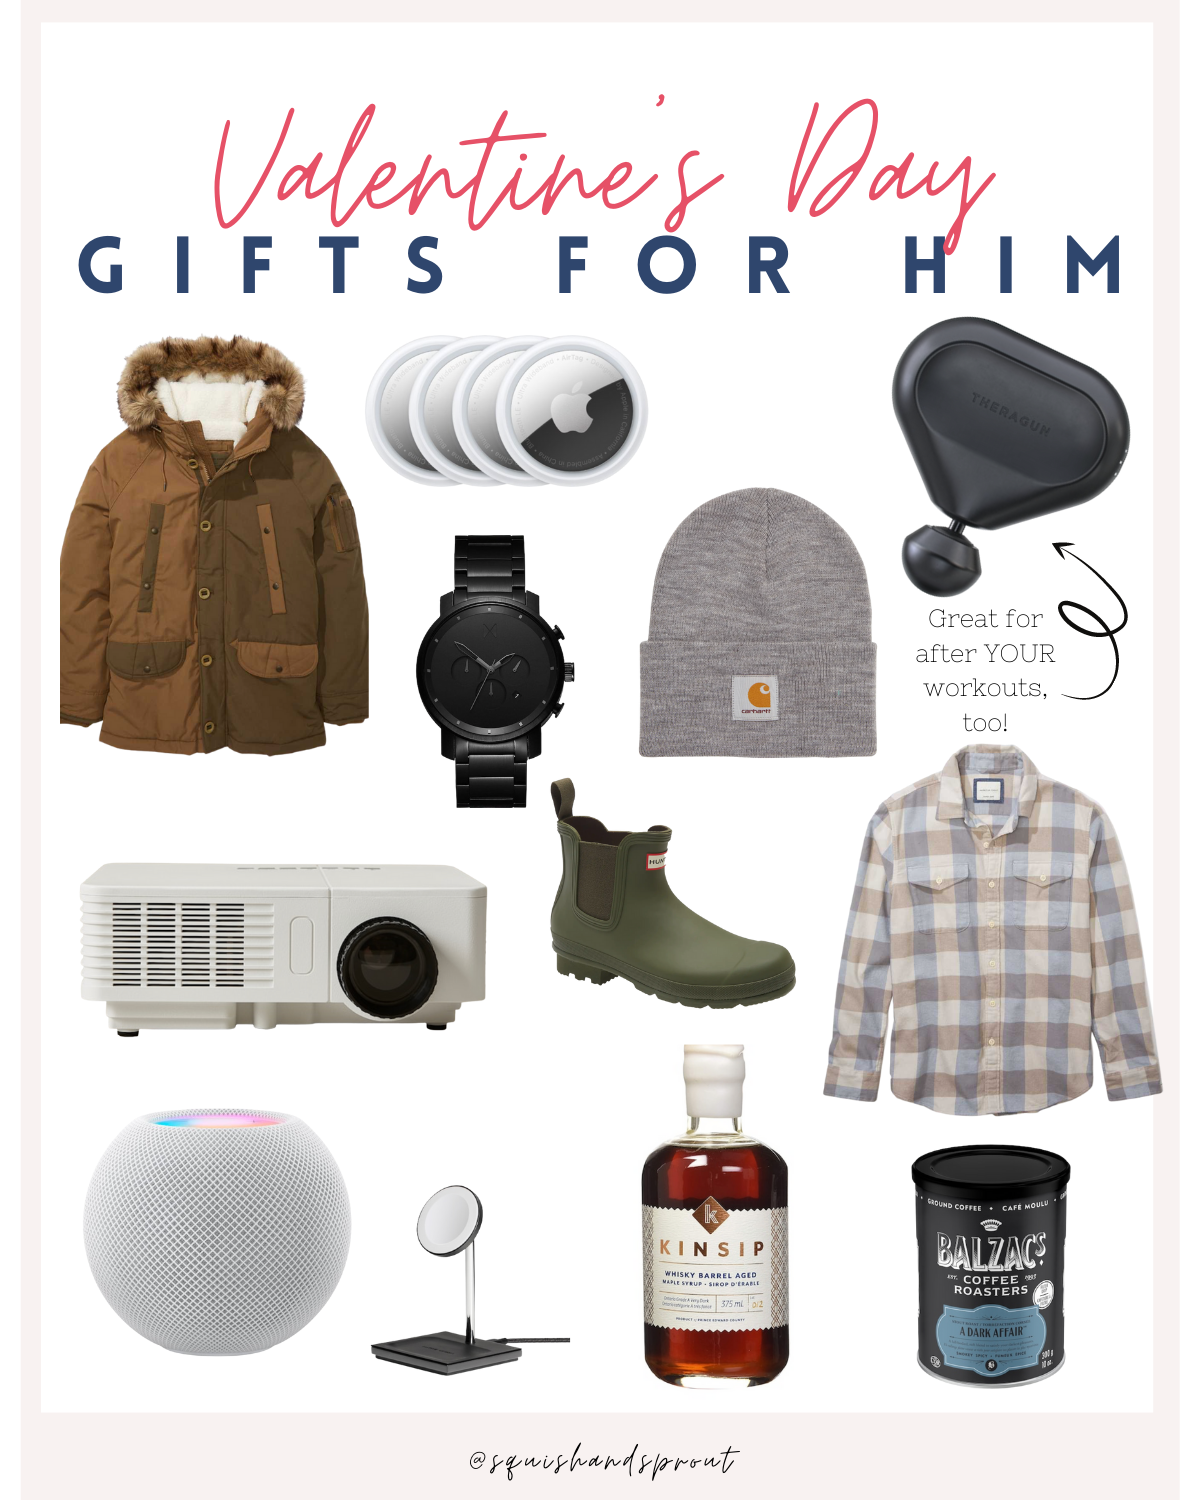 Valentine’s Day Gift Guide for HIM